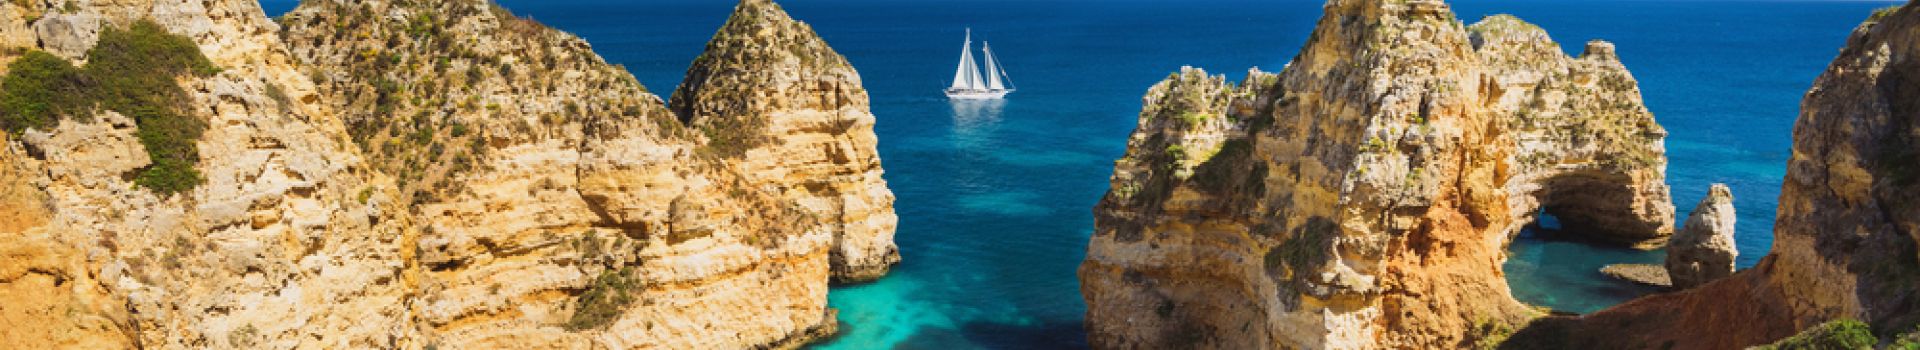 Cheap Holidays to the Algarve with Cassidy Travel